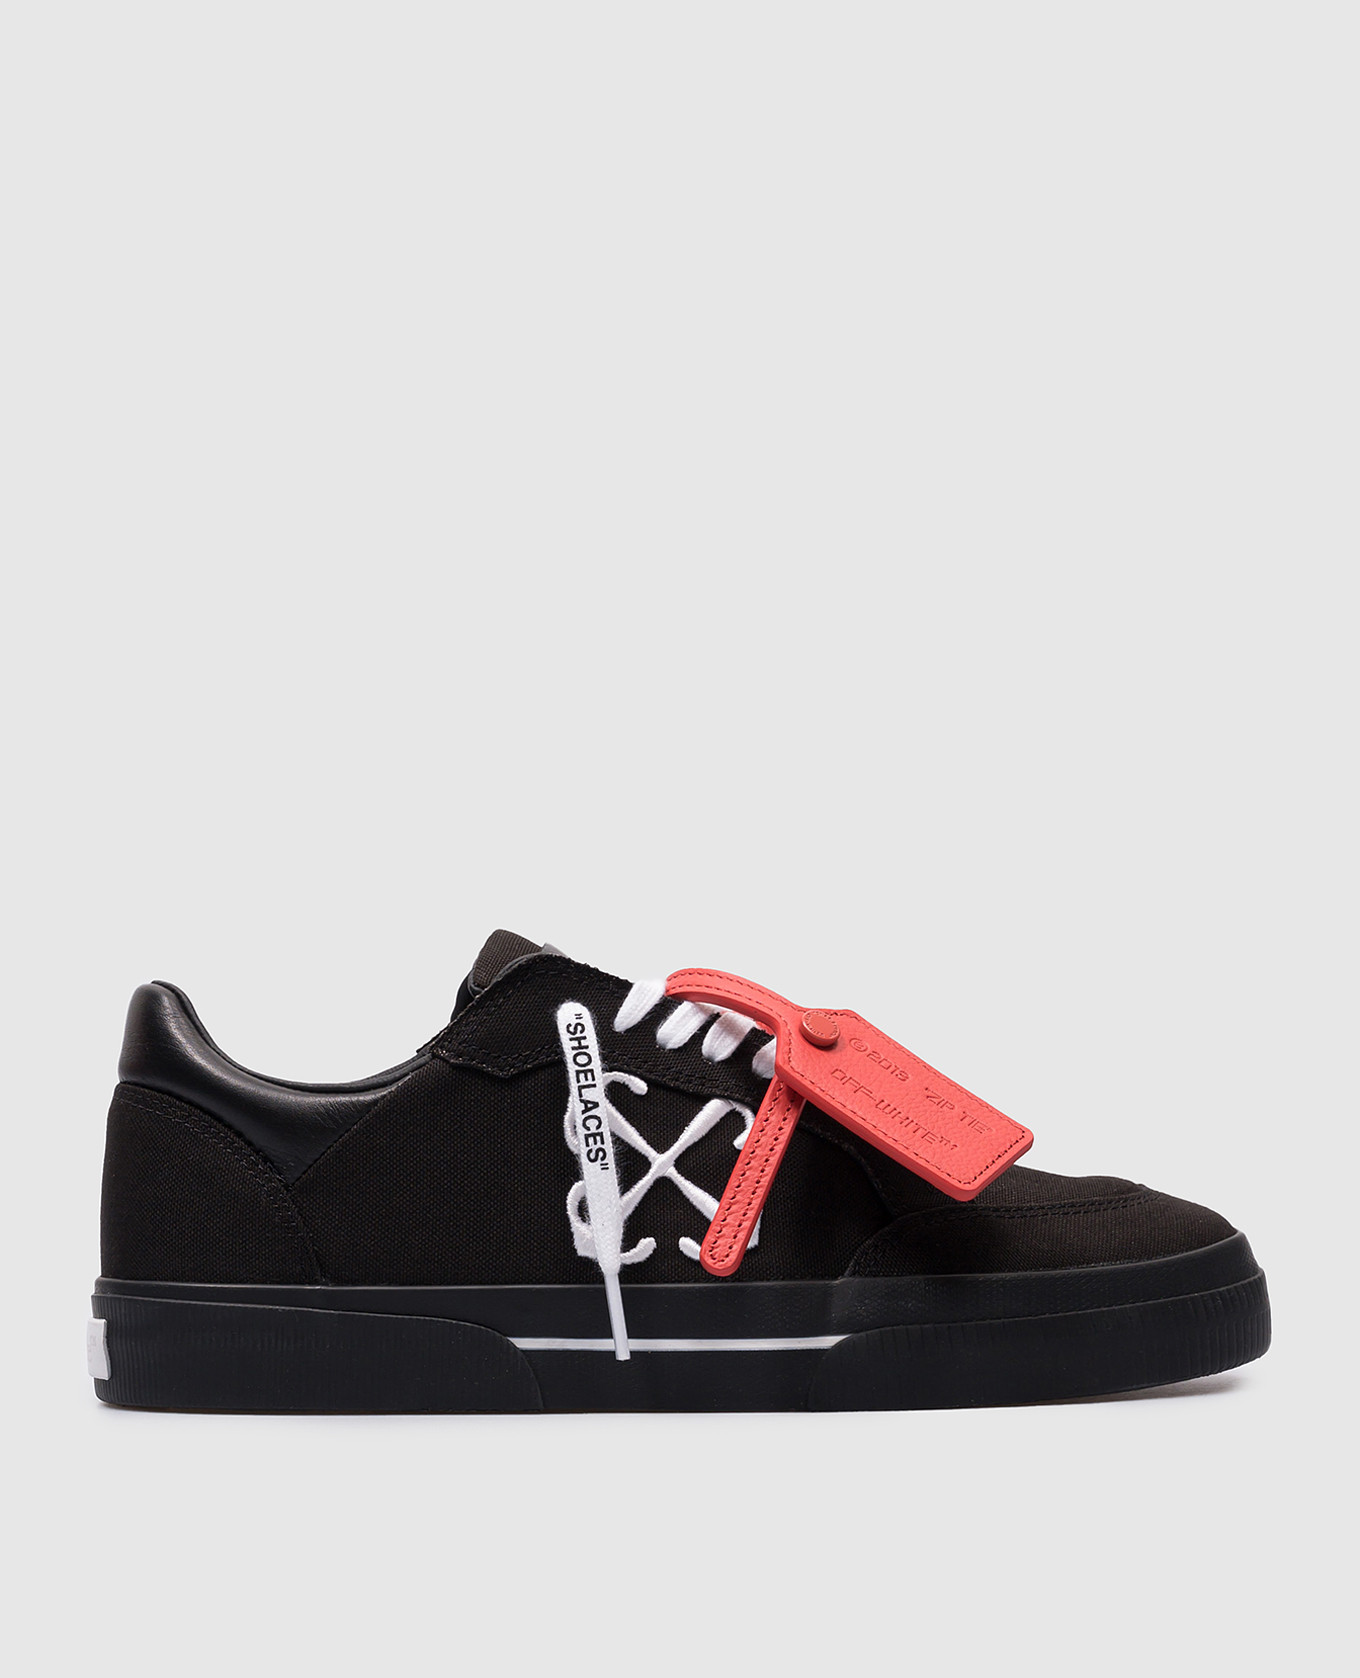 Black sneakers with Arrow logo embroidery